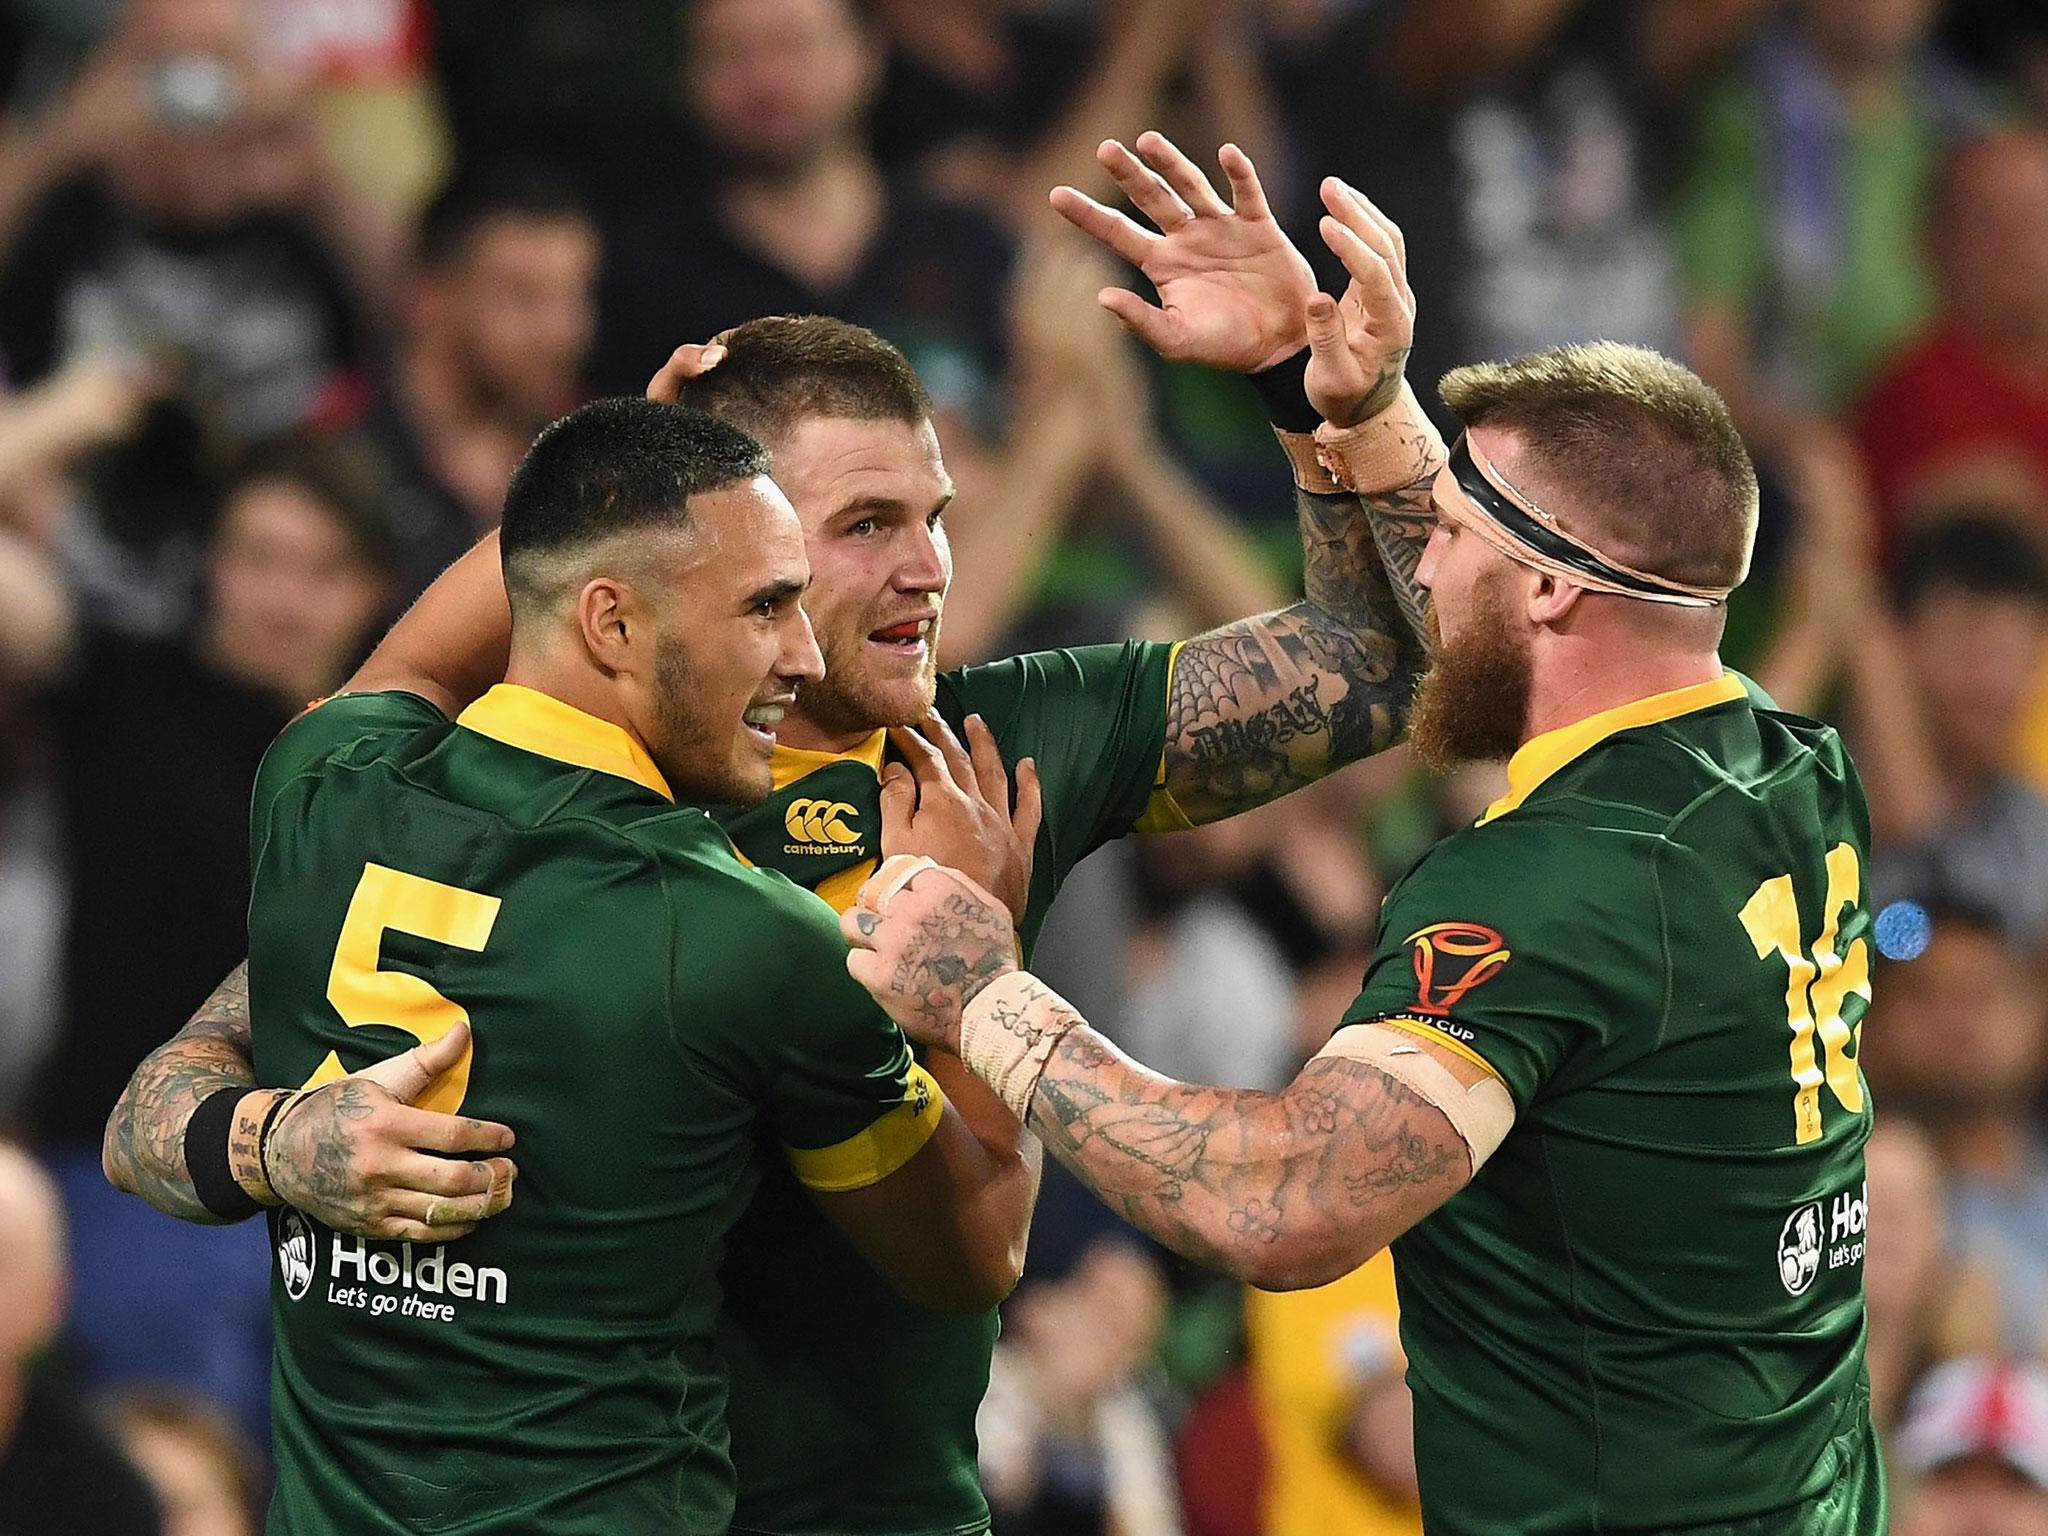 Dugan raced clear late to seal the win for the Kangaroos